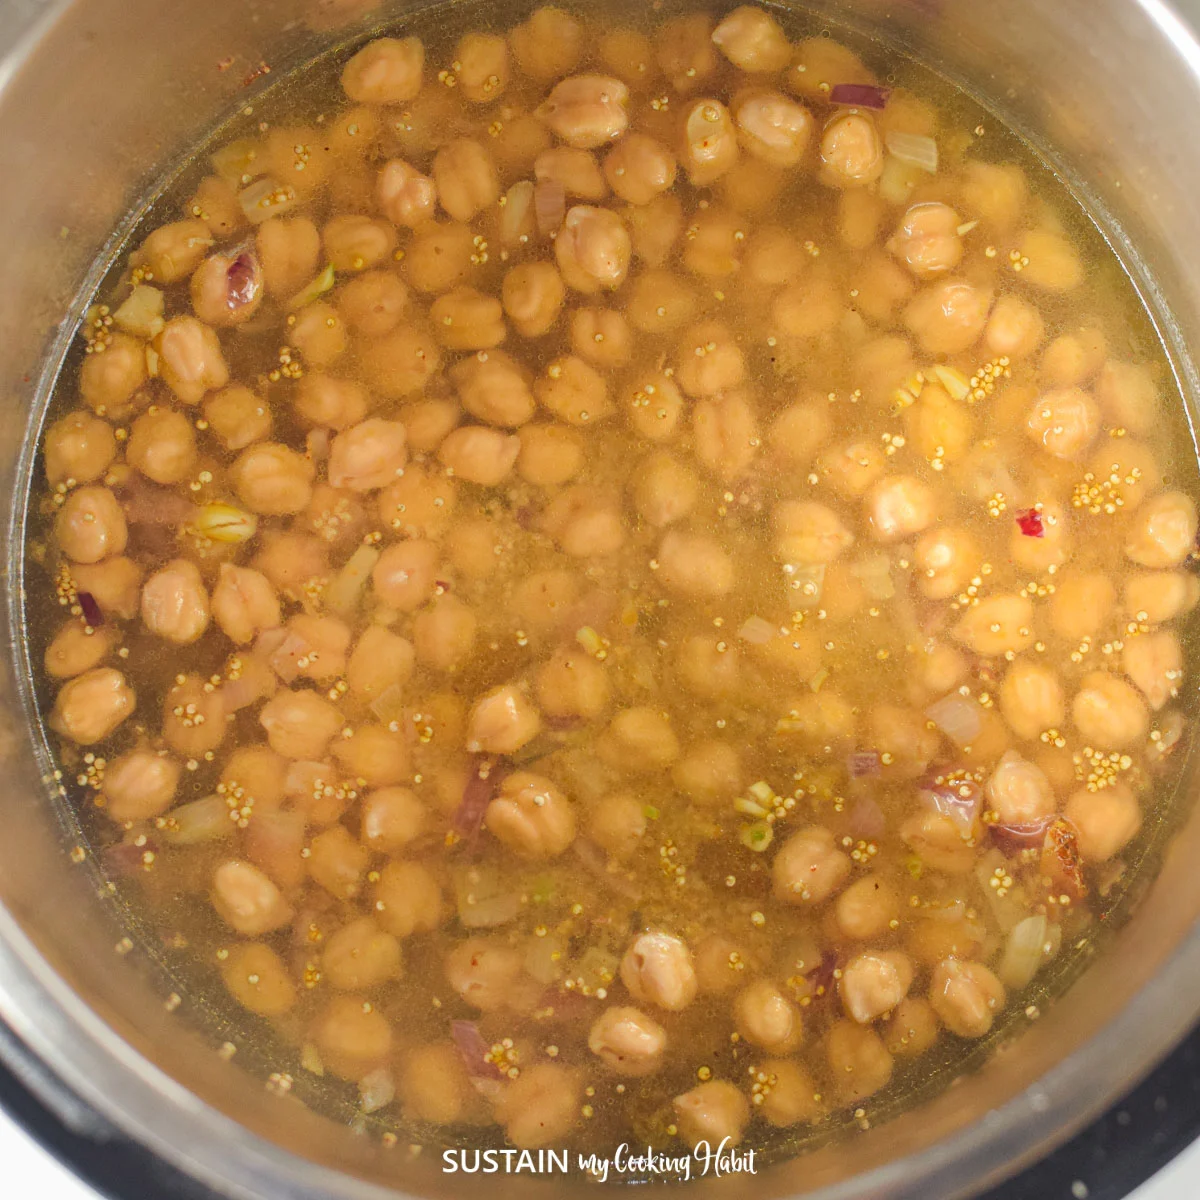 Adding broth and chickpeas to the Instant Pot.